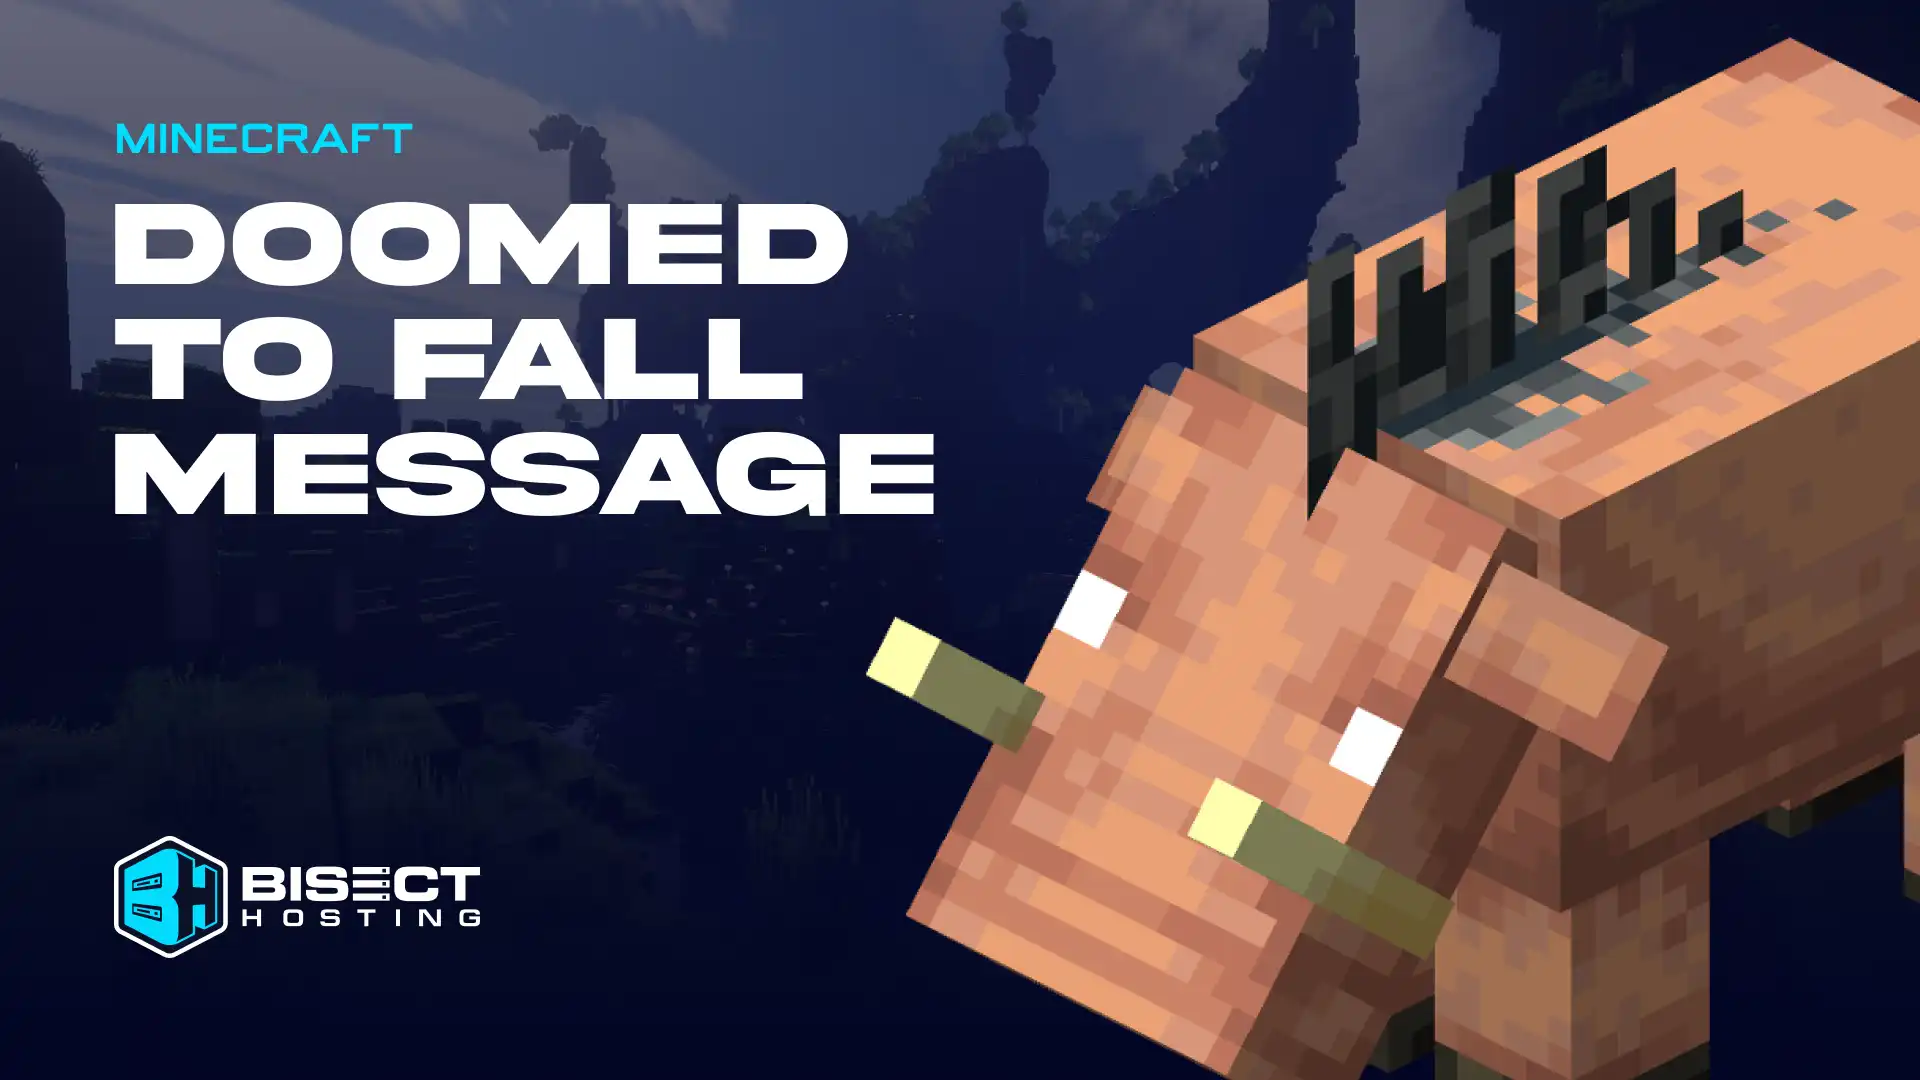 What is the Minecraft "Doomed To Fall" Death Message?